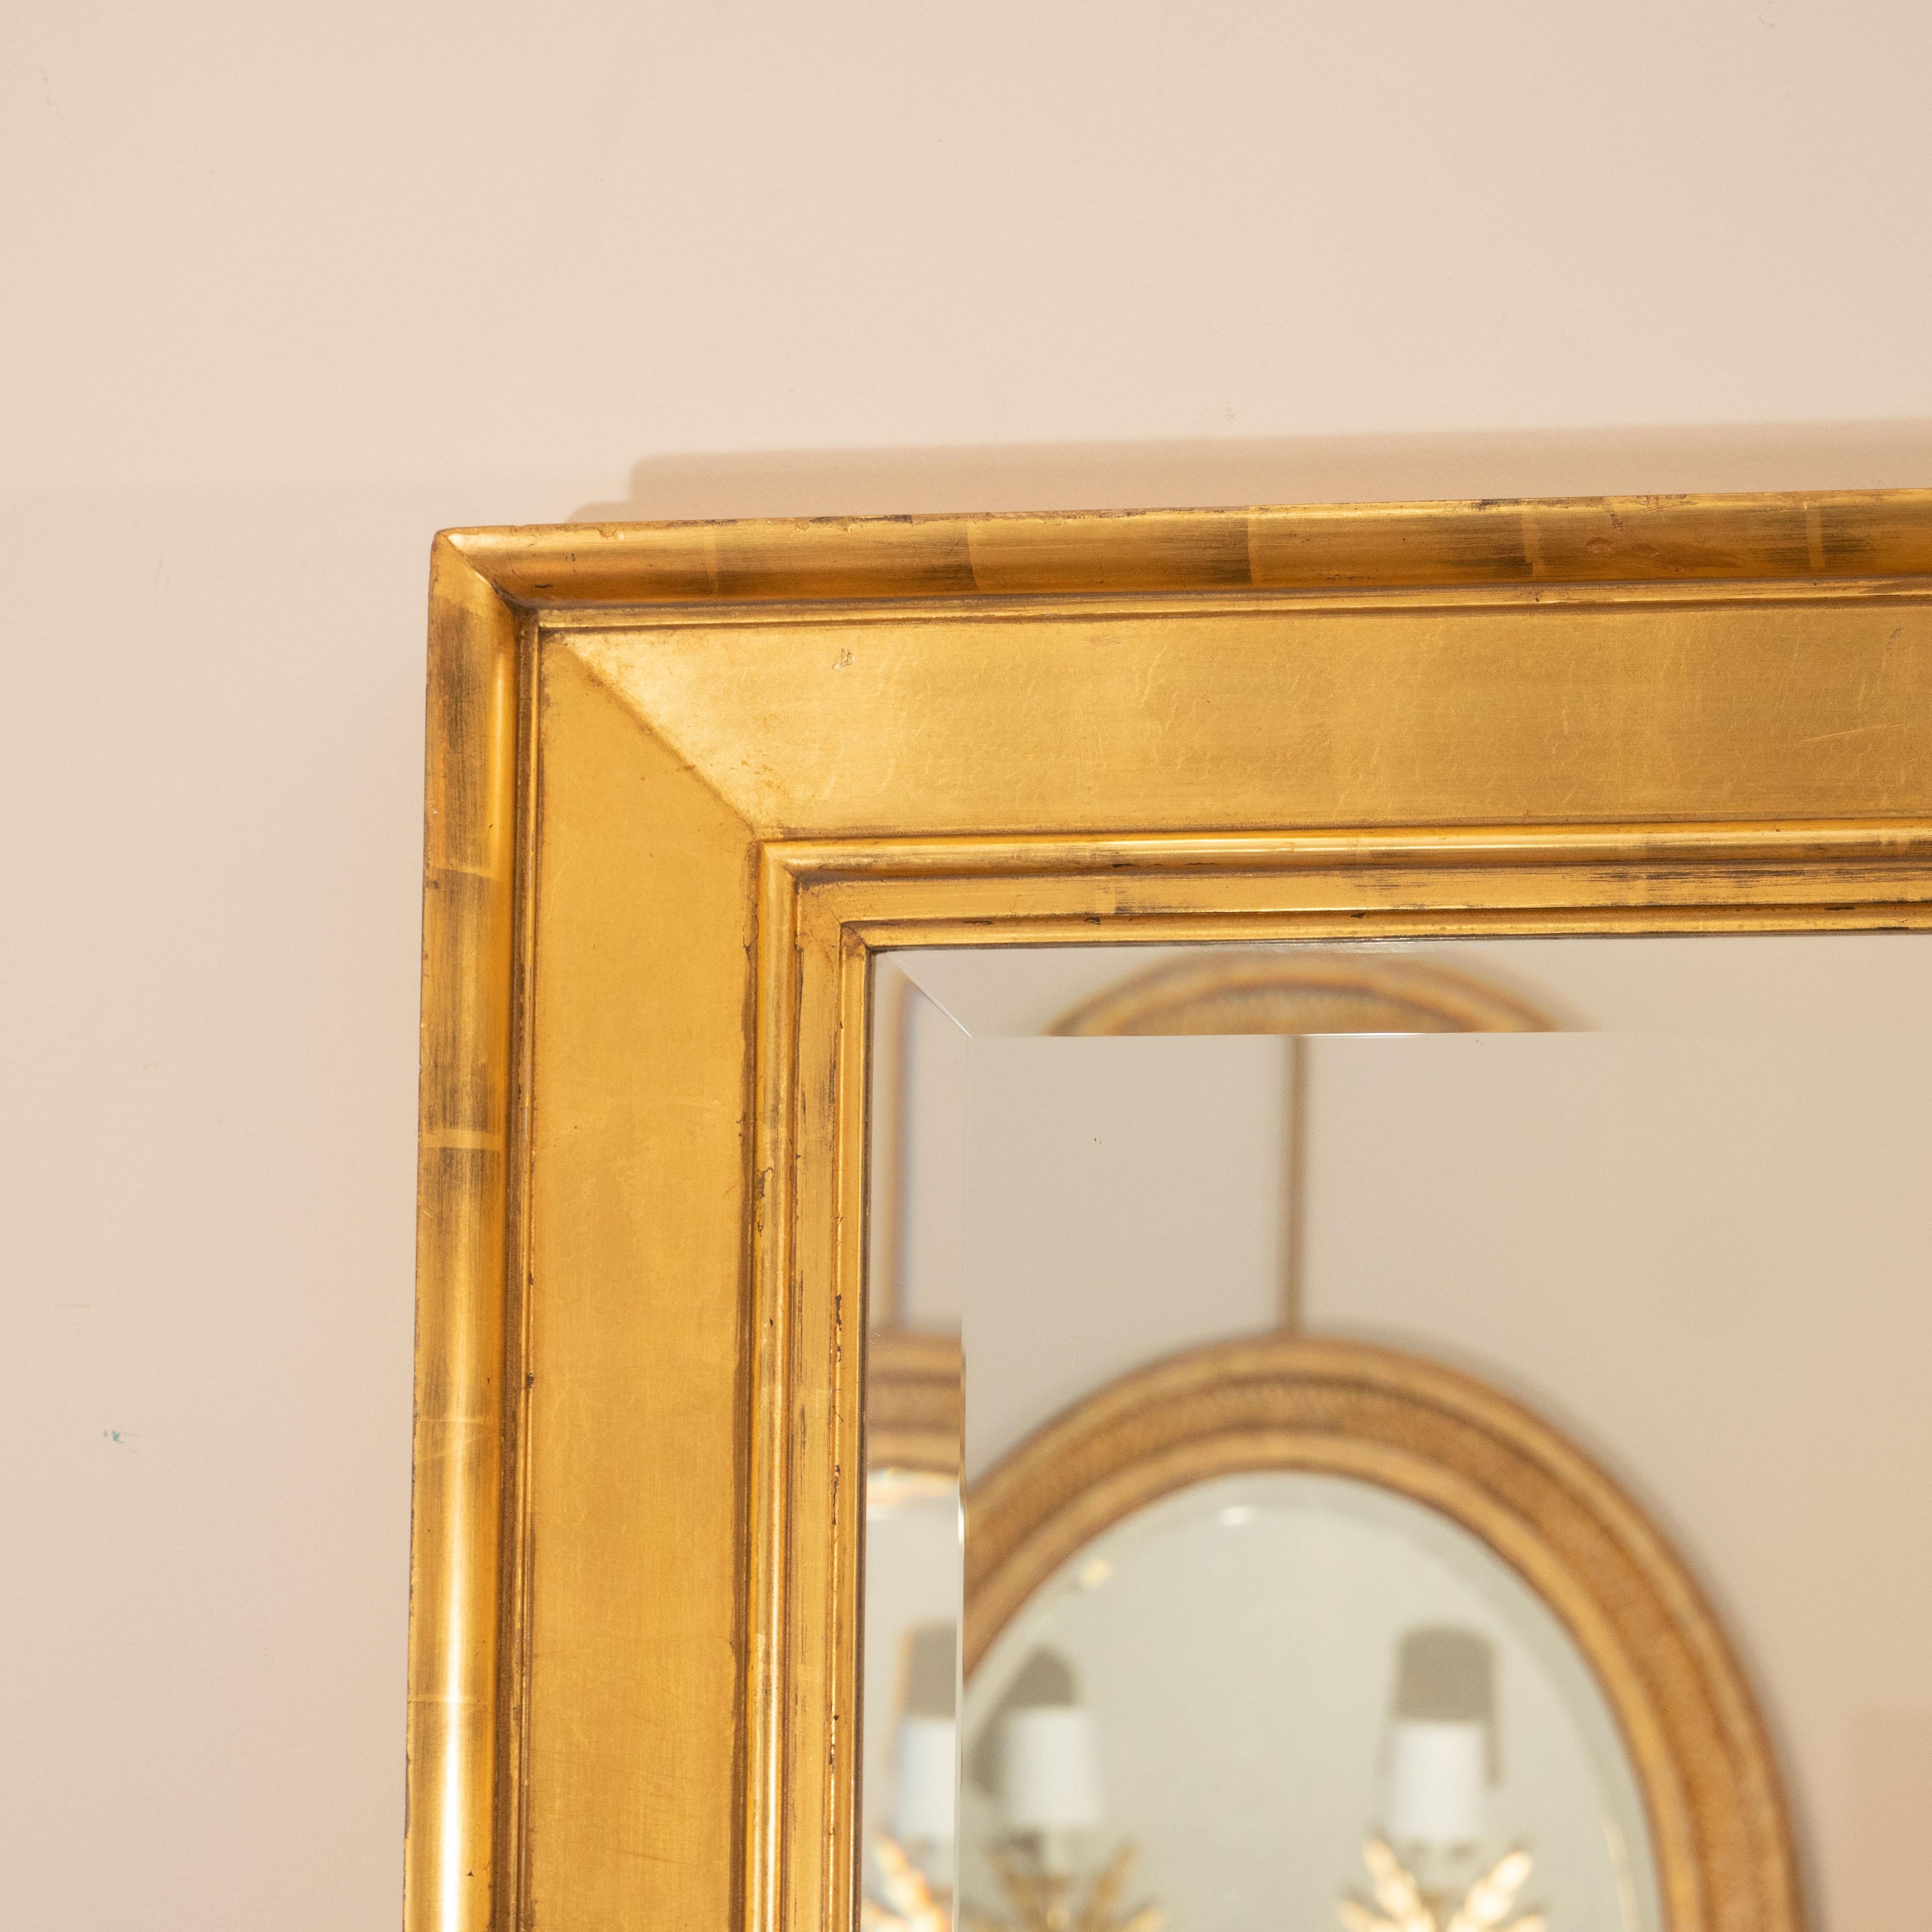 A late 19th century water-gilt frame with a later bevelled mirror. This beauty has aged to a wonderful warm finish and has exquisite molded detail. It will make a dramatic statement in any room!